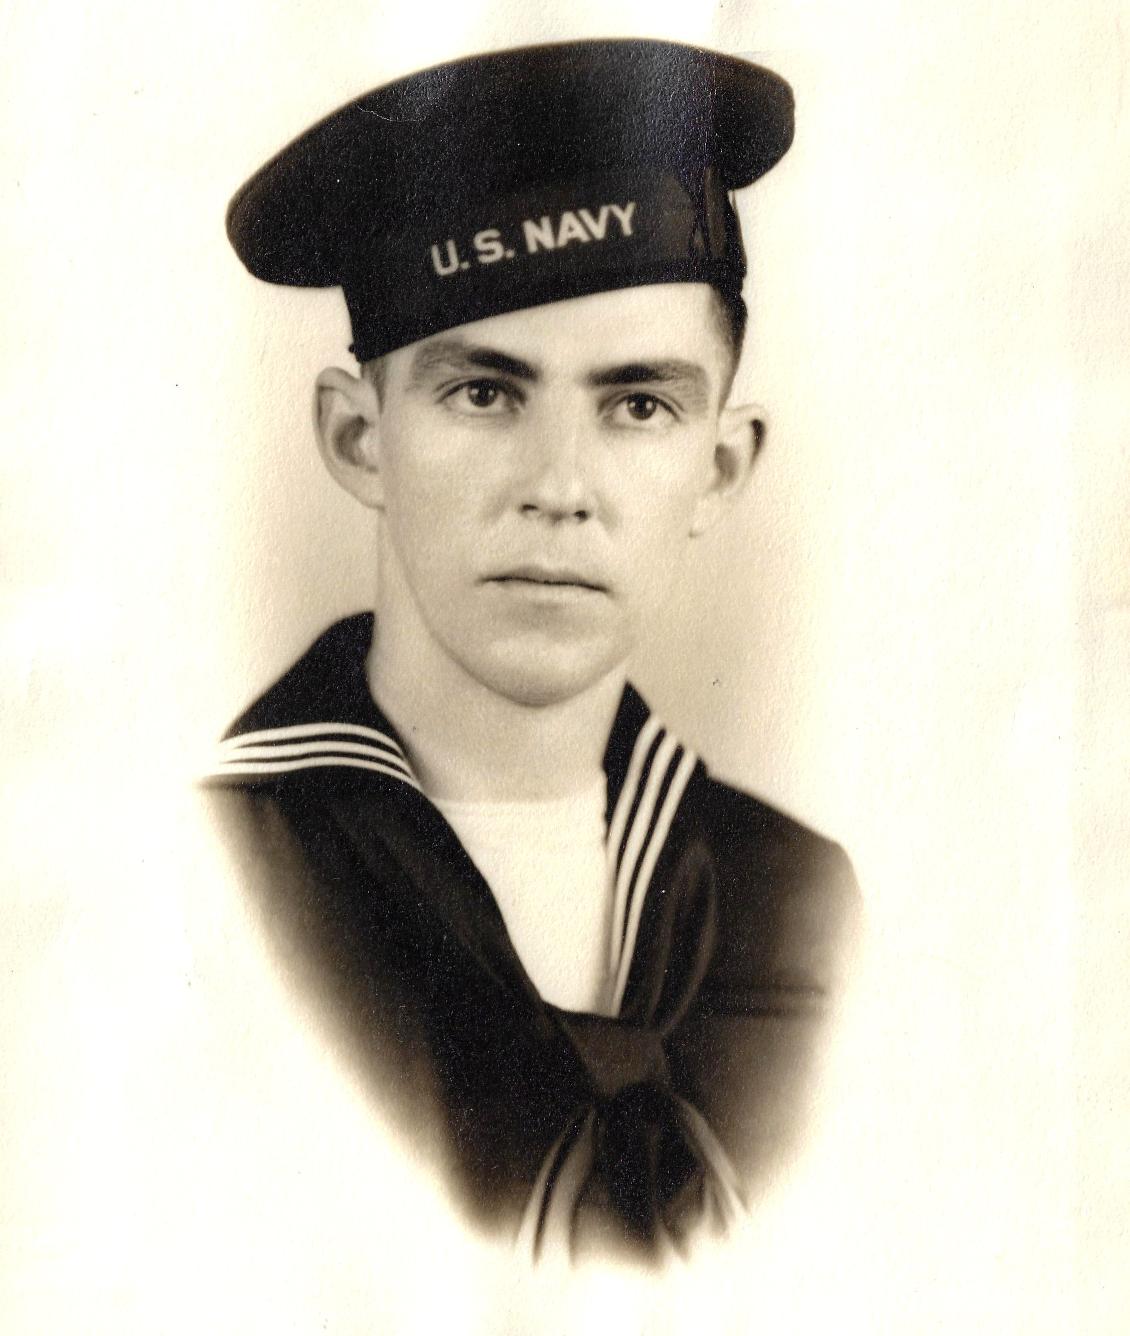 Fred Wesley Wyman - Lost on the Coast Guard Cutter Tampa September 26 1918